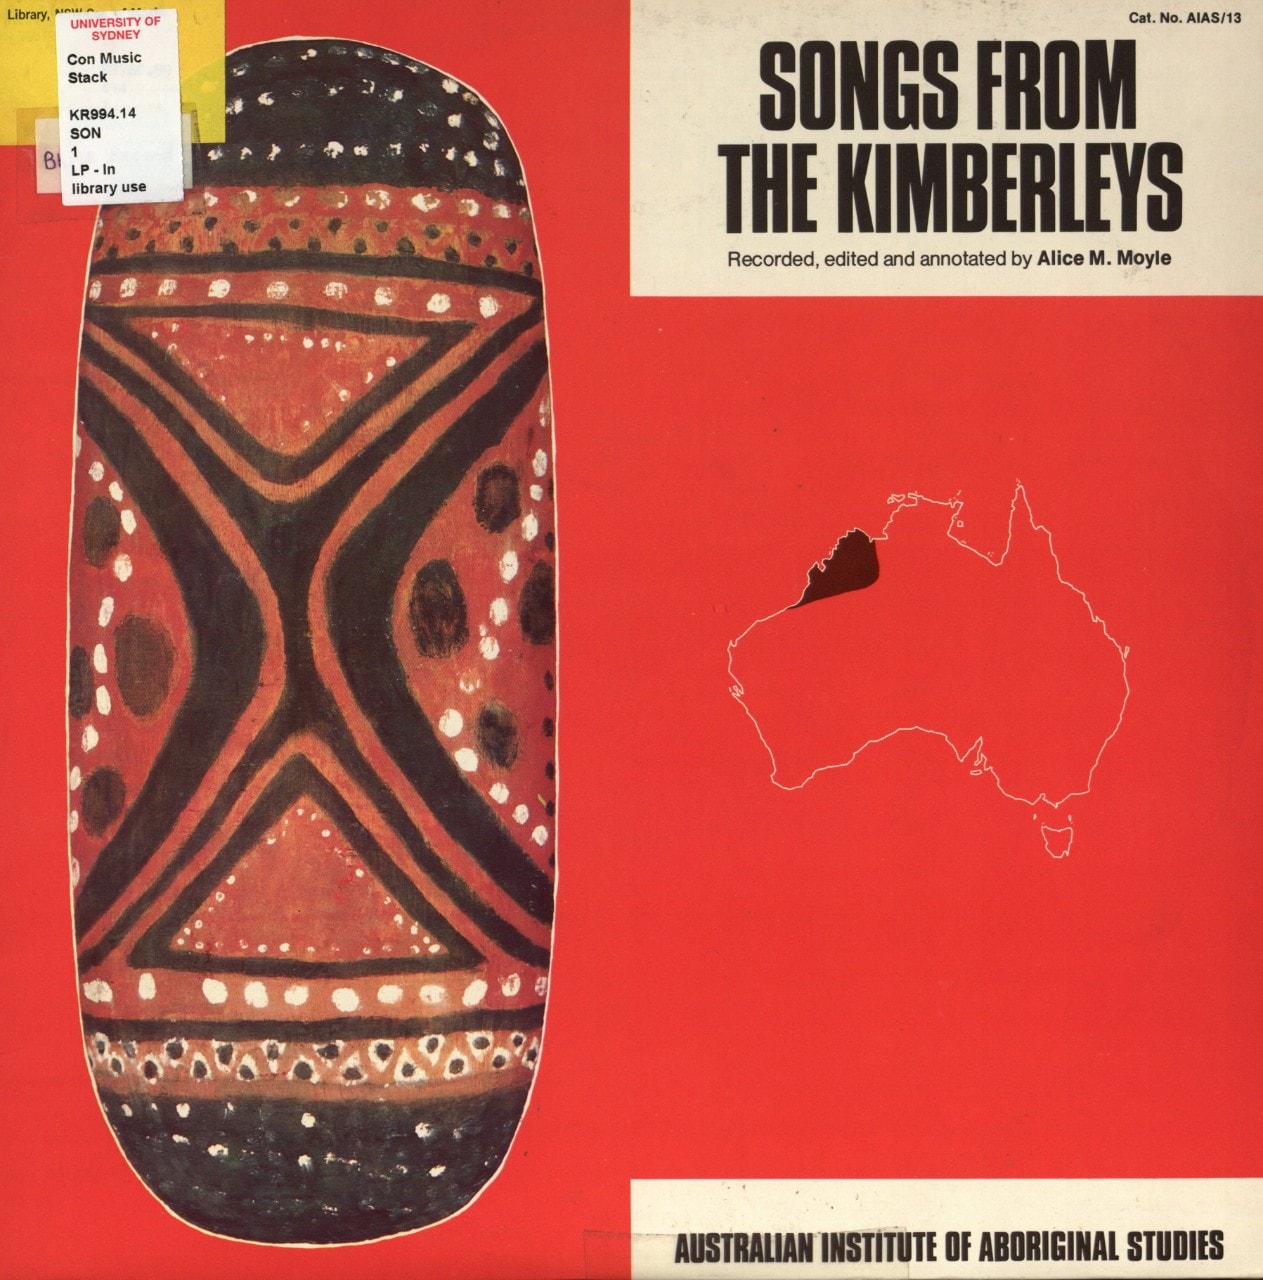 Album cover of vinyl recording 'Songs from the Kimberleys', recorded and edited by Alice M. Moyle. 1977